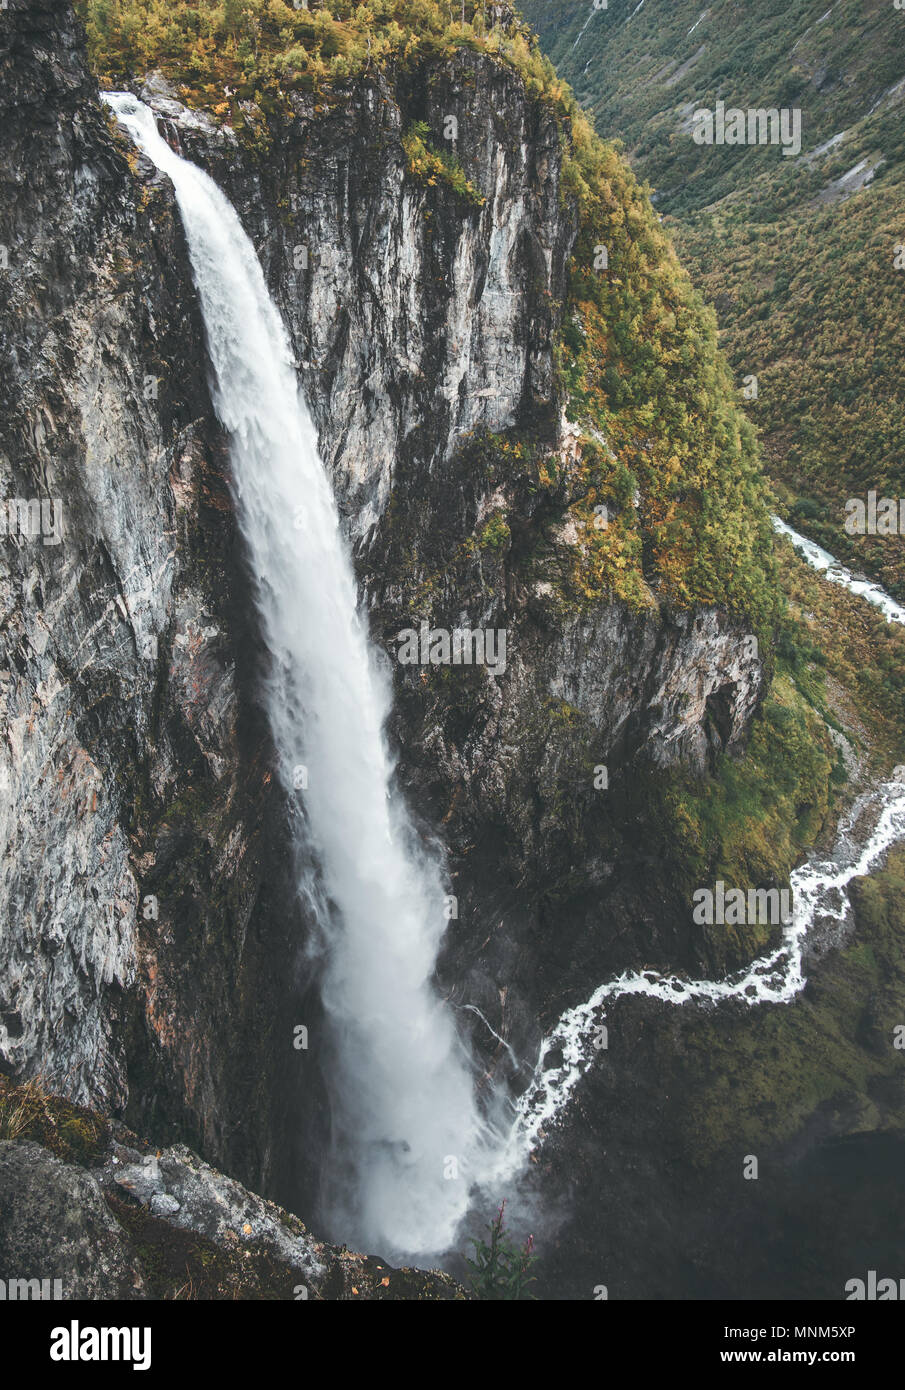 Landscape Waterfall Vettisfossen aerial view in Norway rocky mountains Travel serene scenery wild nature view from above Stock Photo